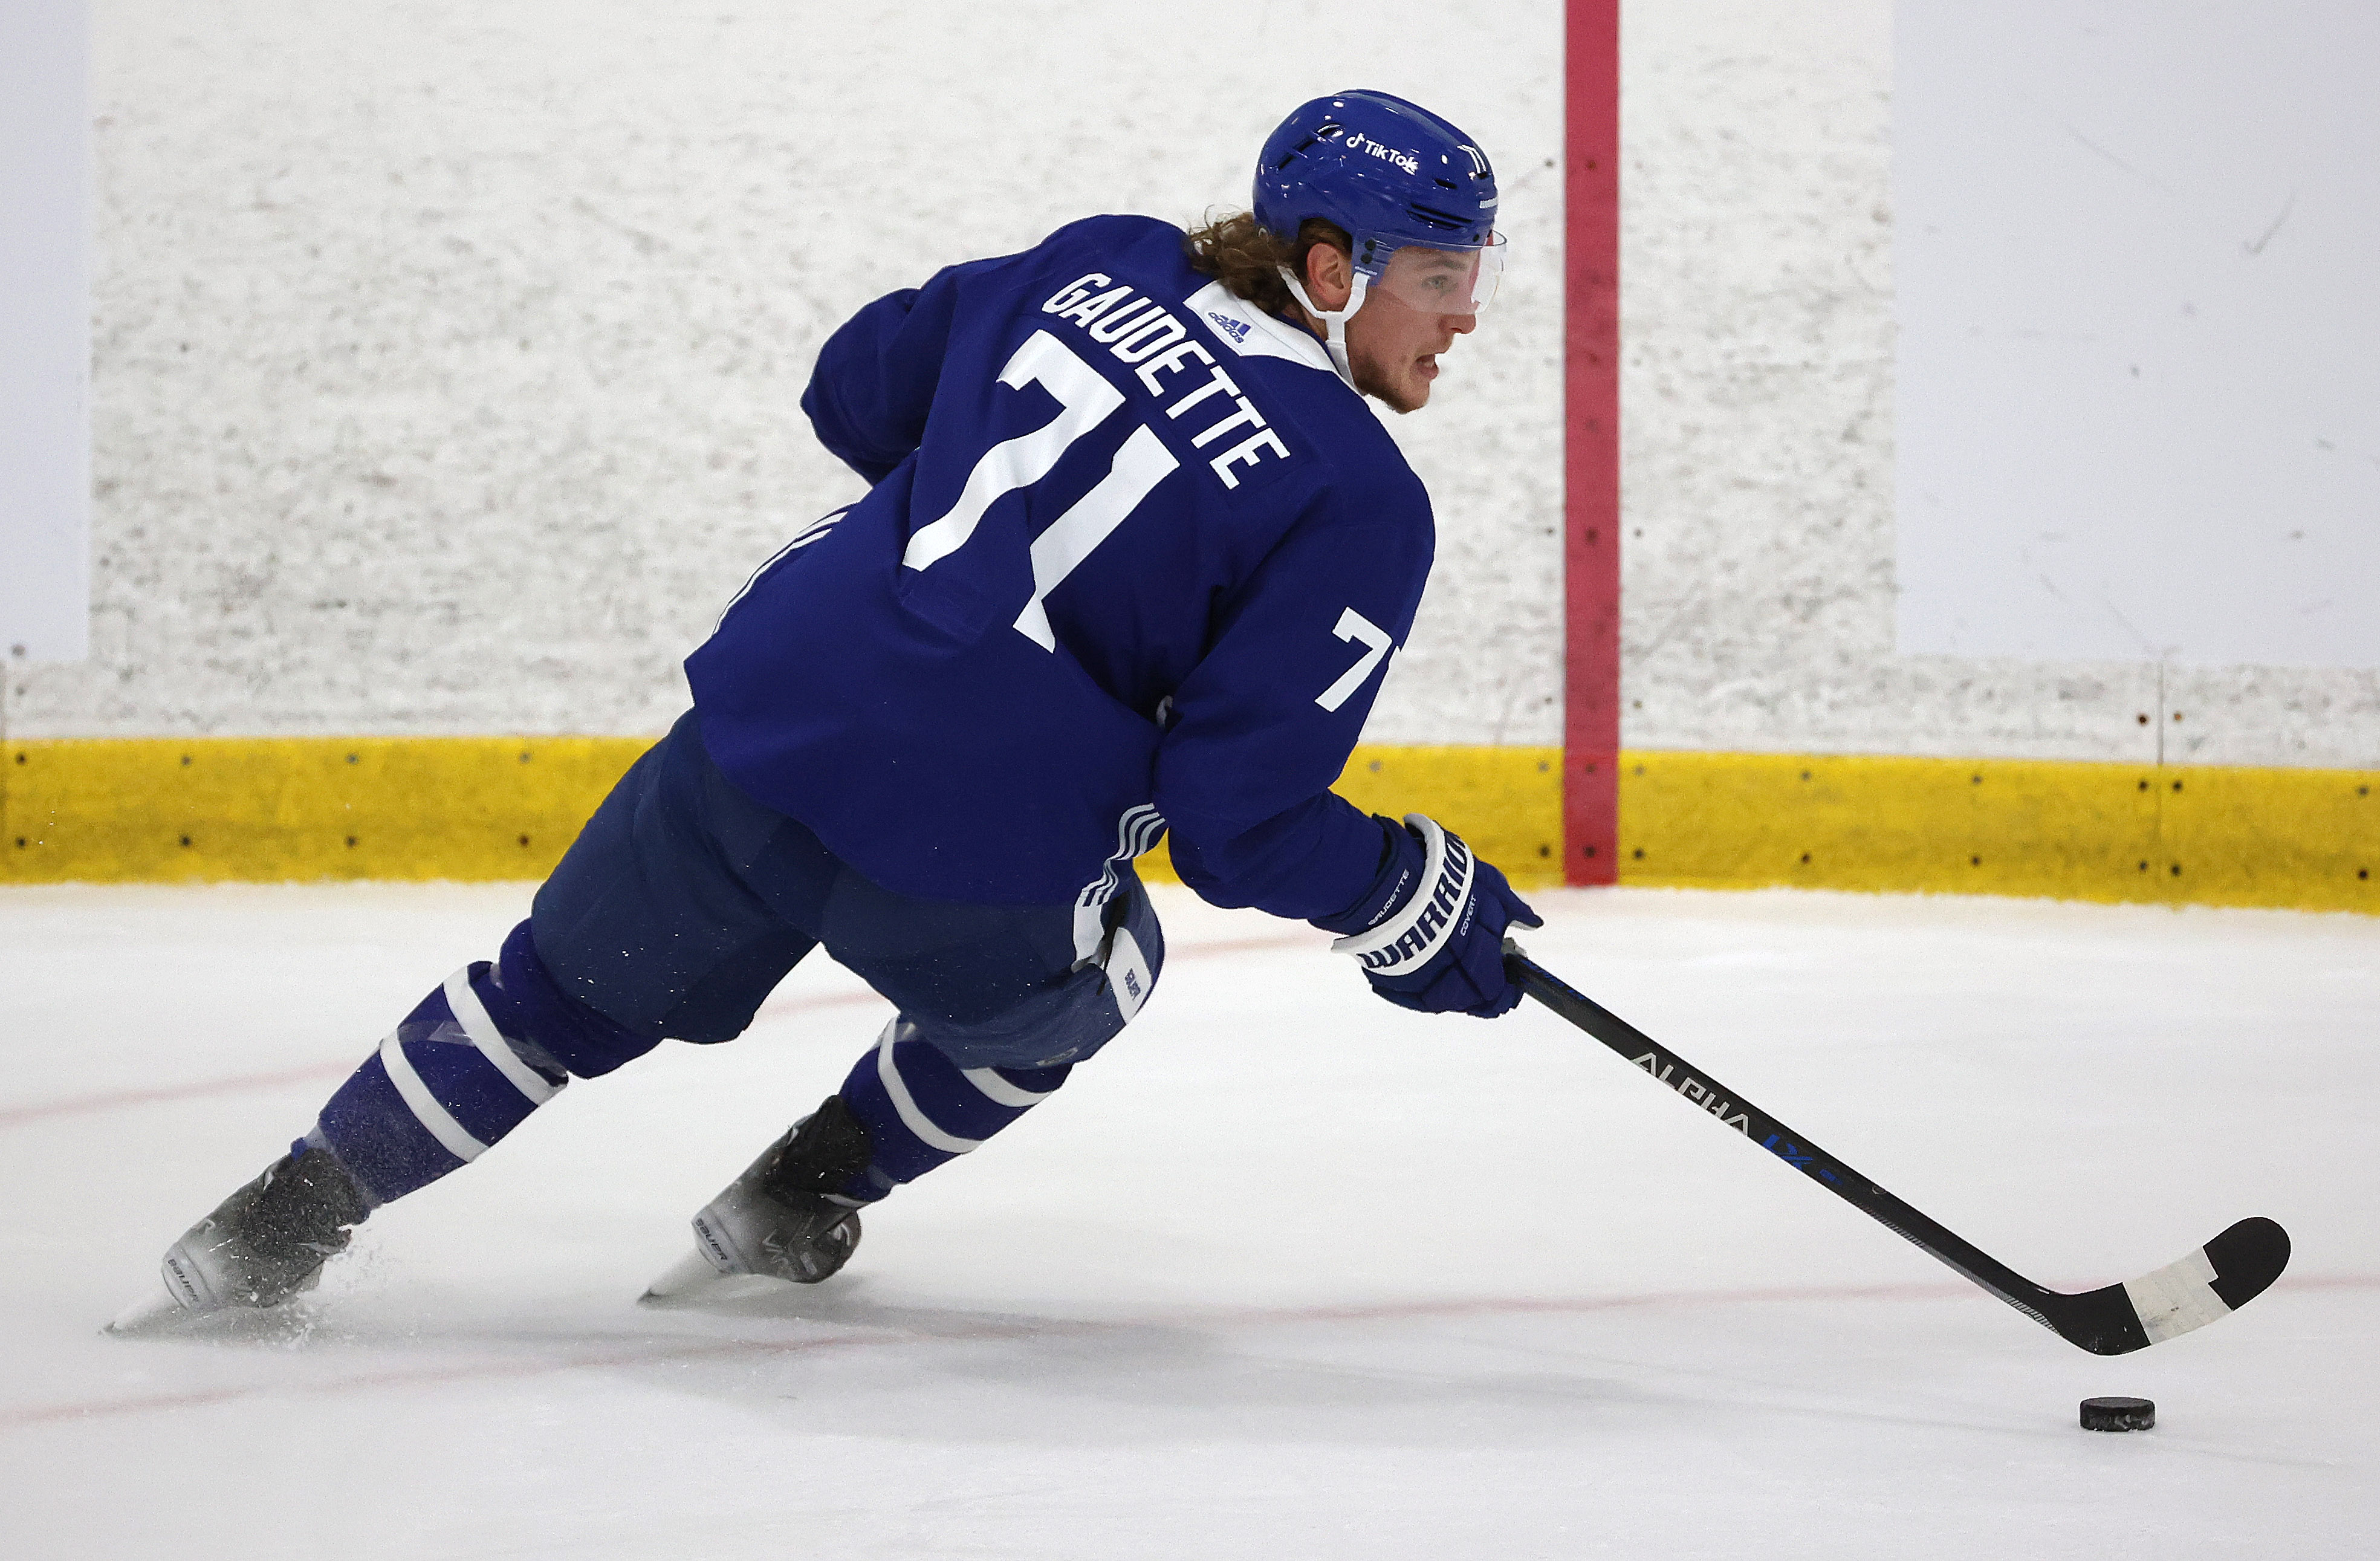 Toronto Maple Leafs open their training camp for the 2022-23 season